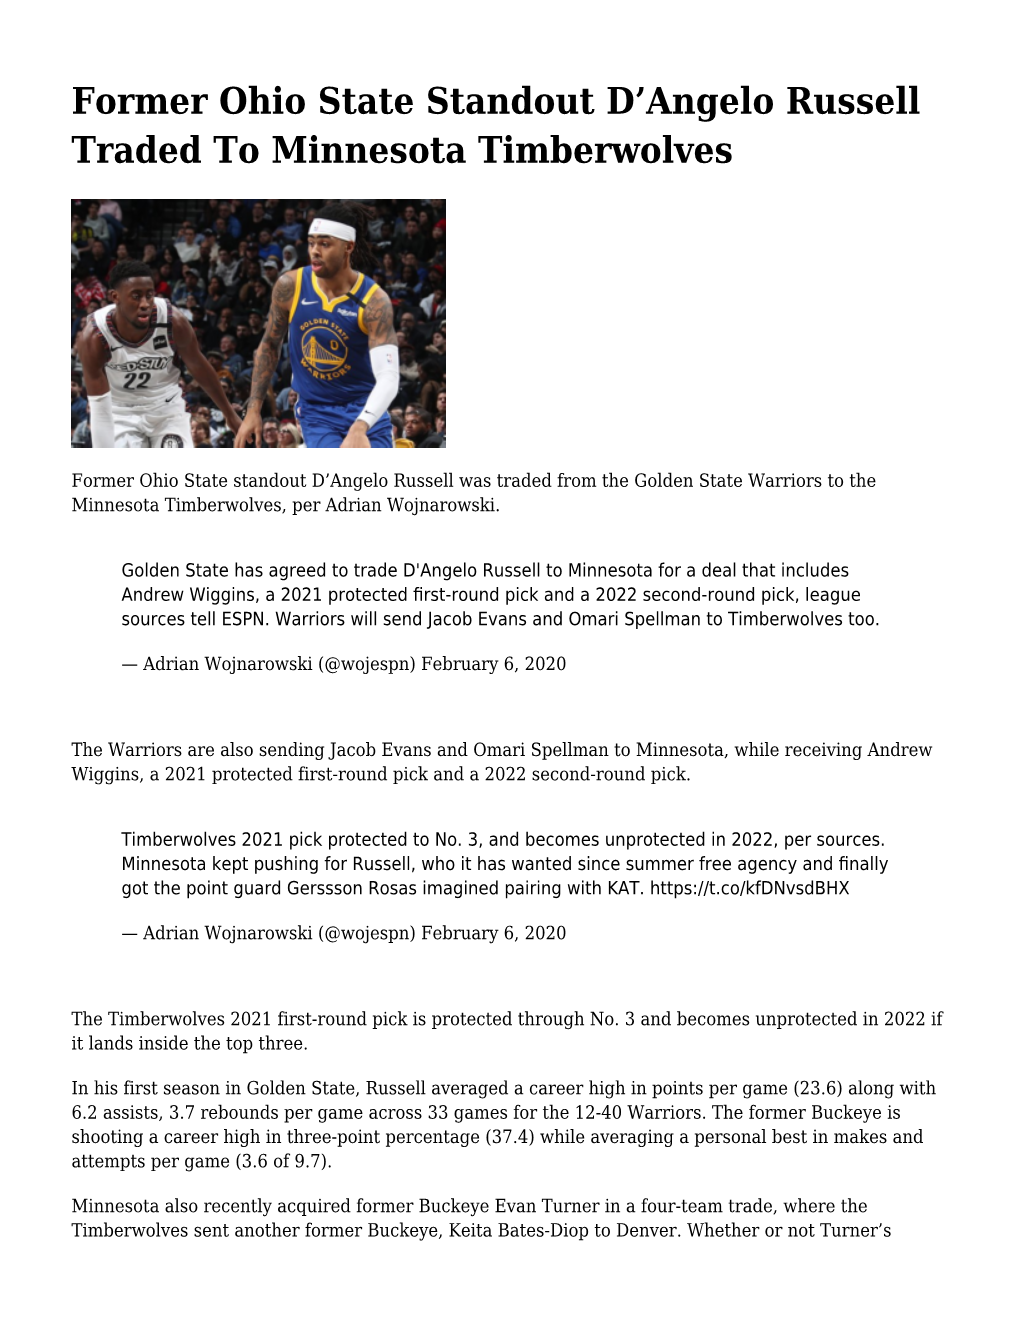 Angelo Russell Traded to Minnesota Timberwolves